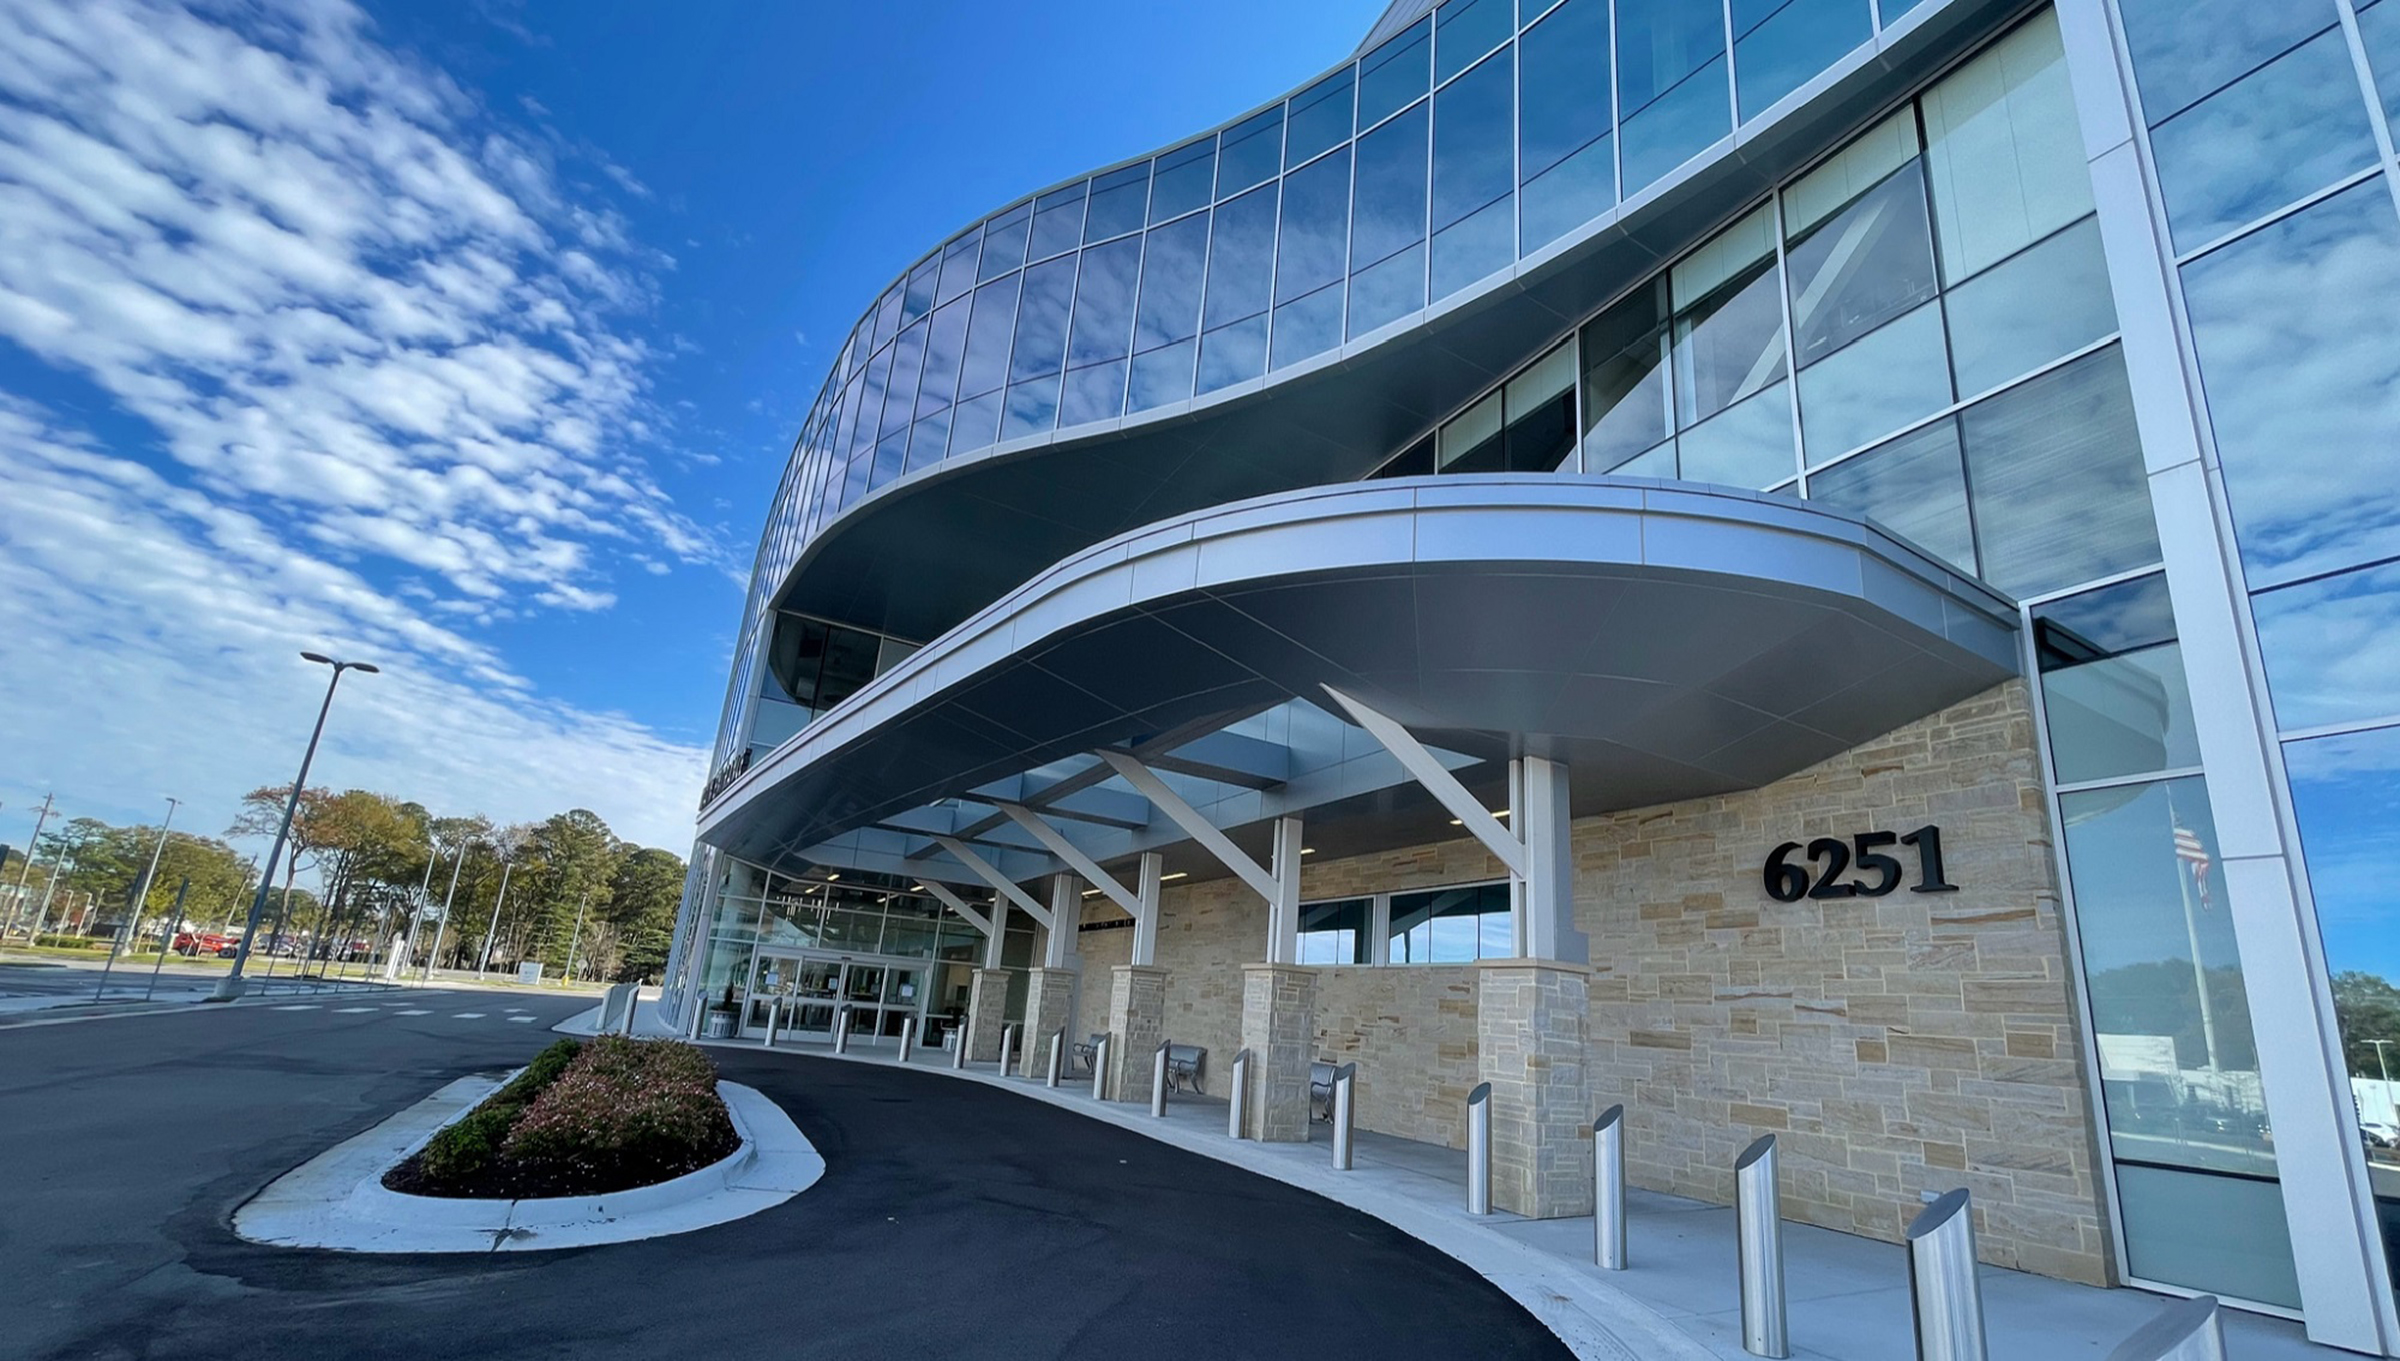 The new Sentara Brock Cancer Center began treating patients on June 1, 2020. This new patient-centered facility transforms cancer care in Hampton Roads, Virginia, by bringing together expert care teams, community organizations and holistic cancer treatment services within one location. 